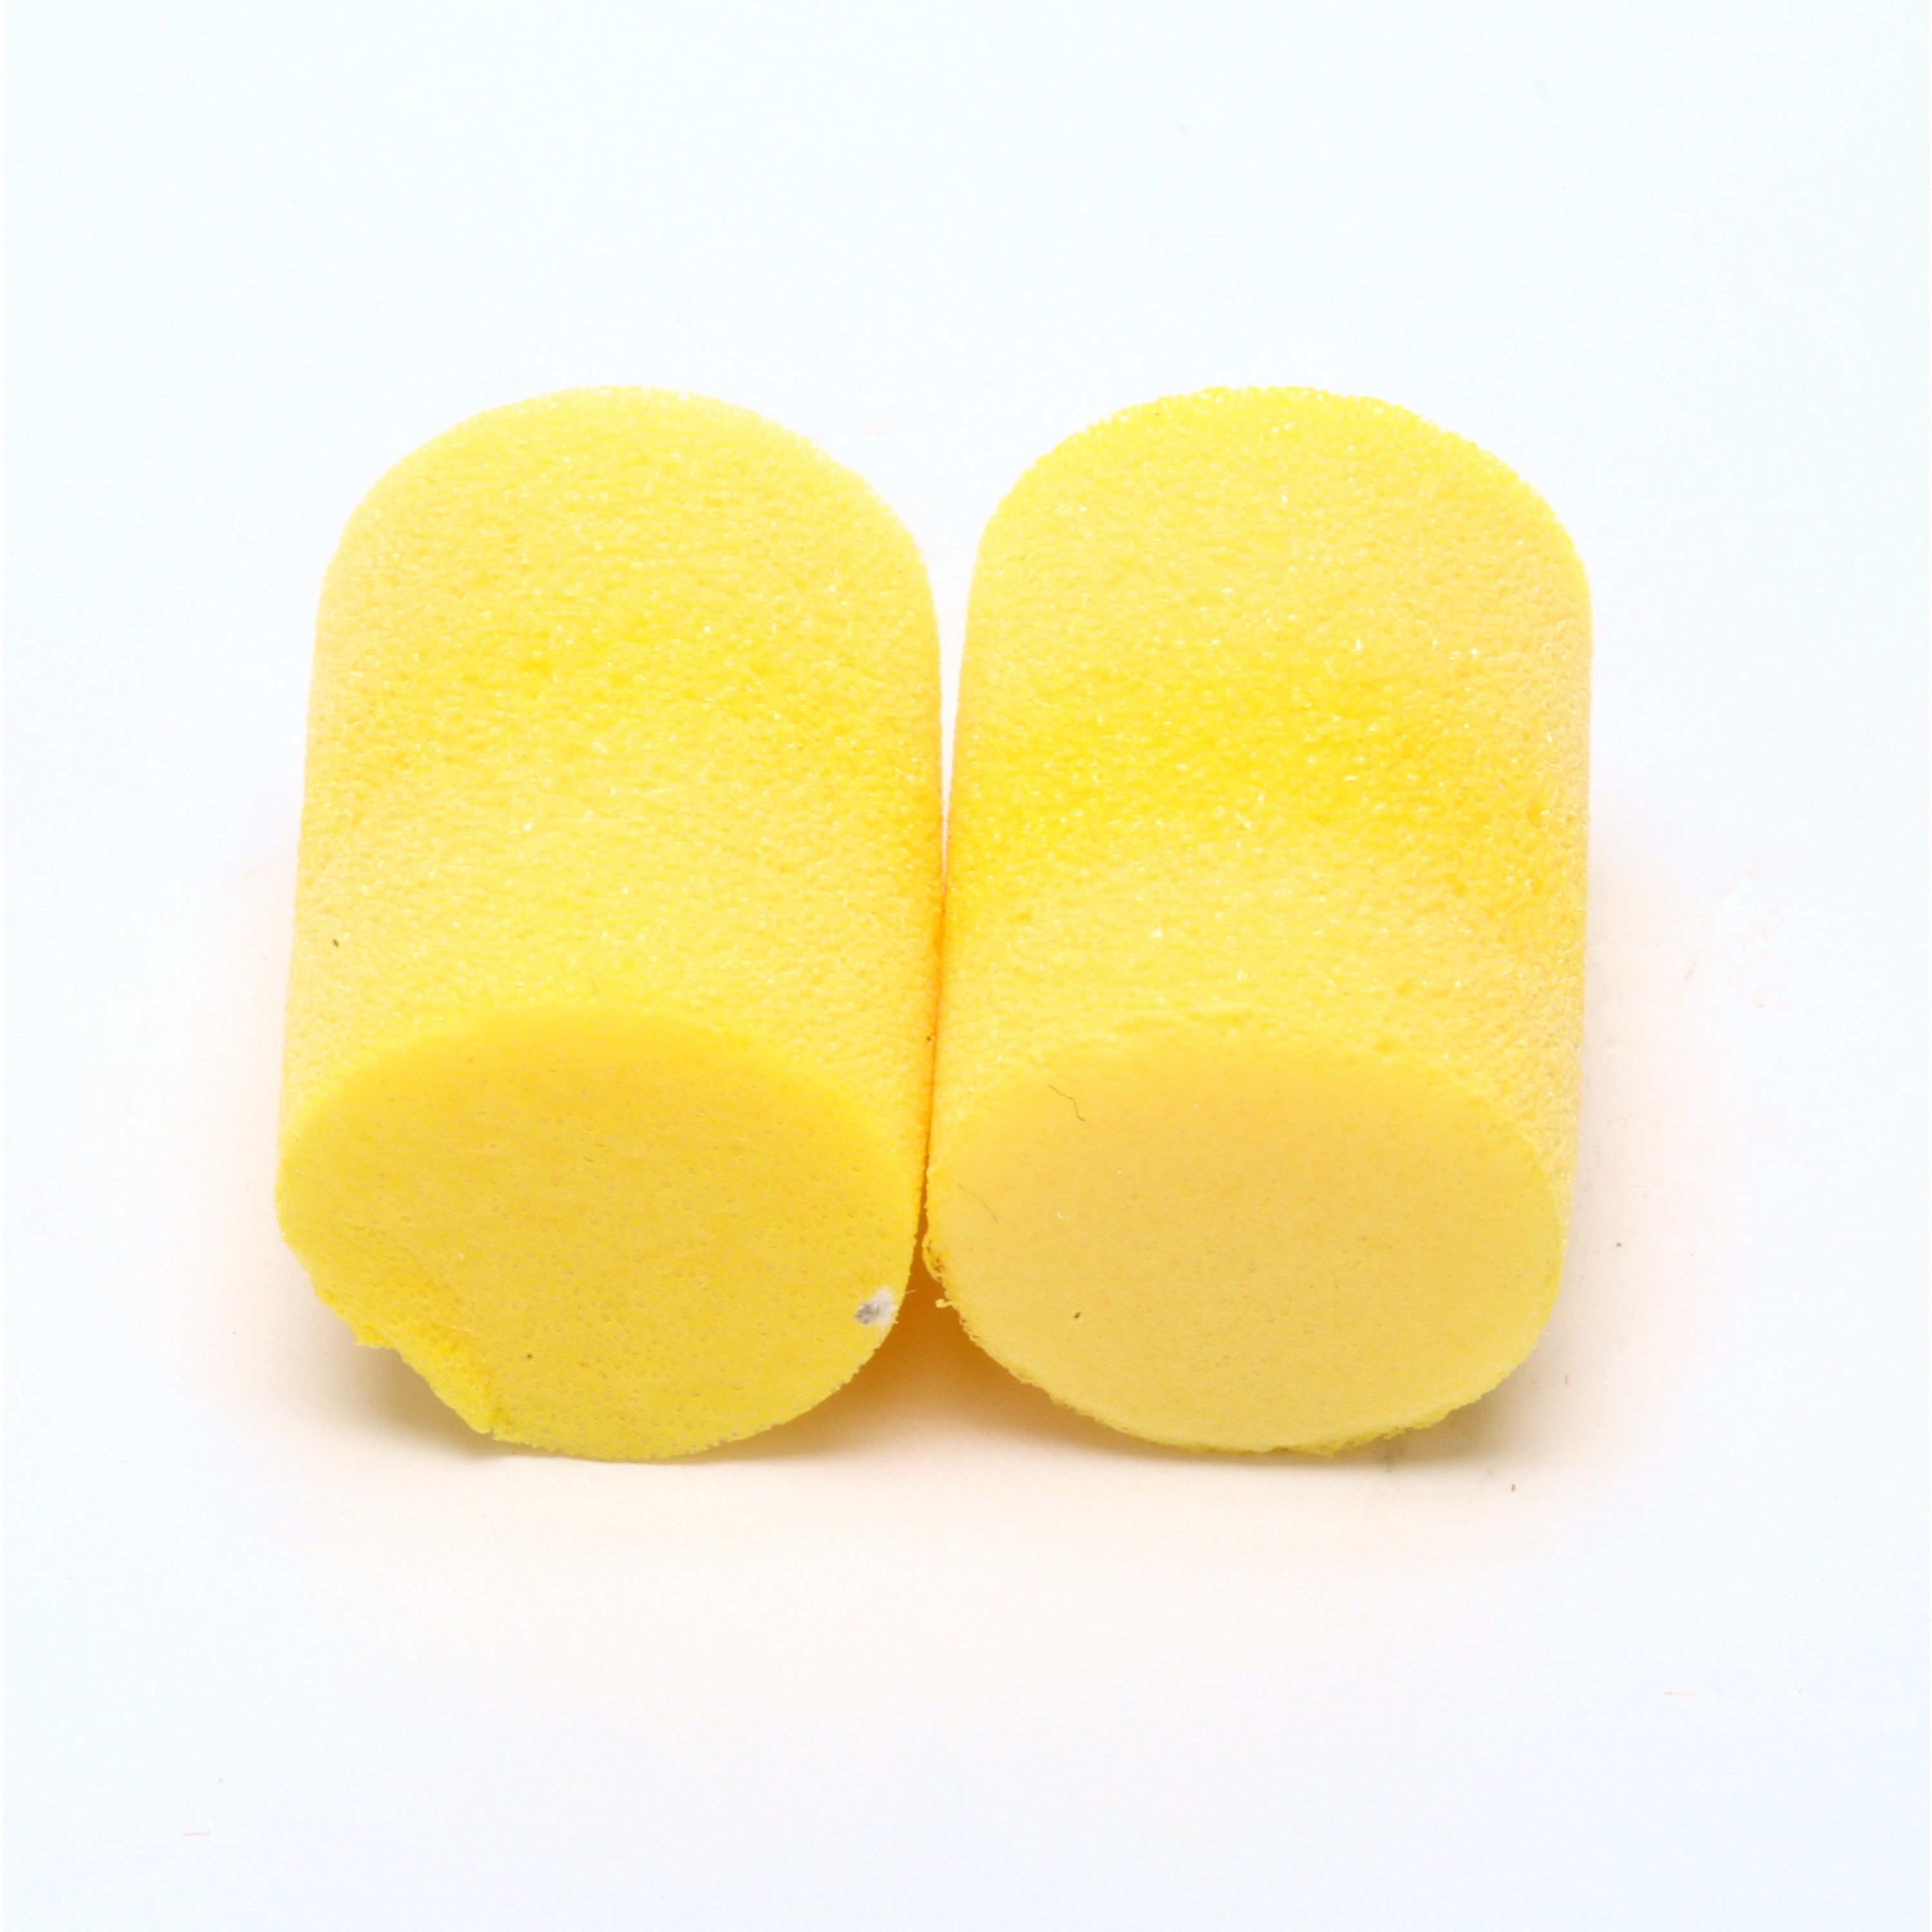 E-A-R™ Classic™ 310-1001 Earplugs, 29 dB Noise Reduction, Cylindrical Shape, ANSI S3.19-1974, Disposable, Uncorded Design